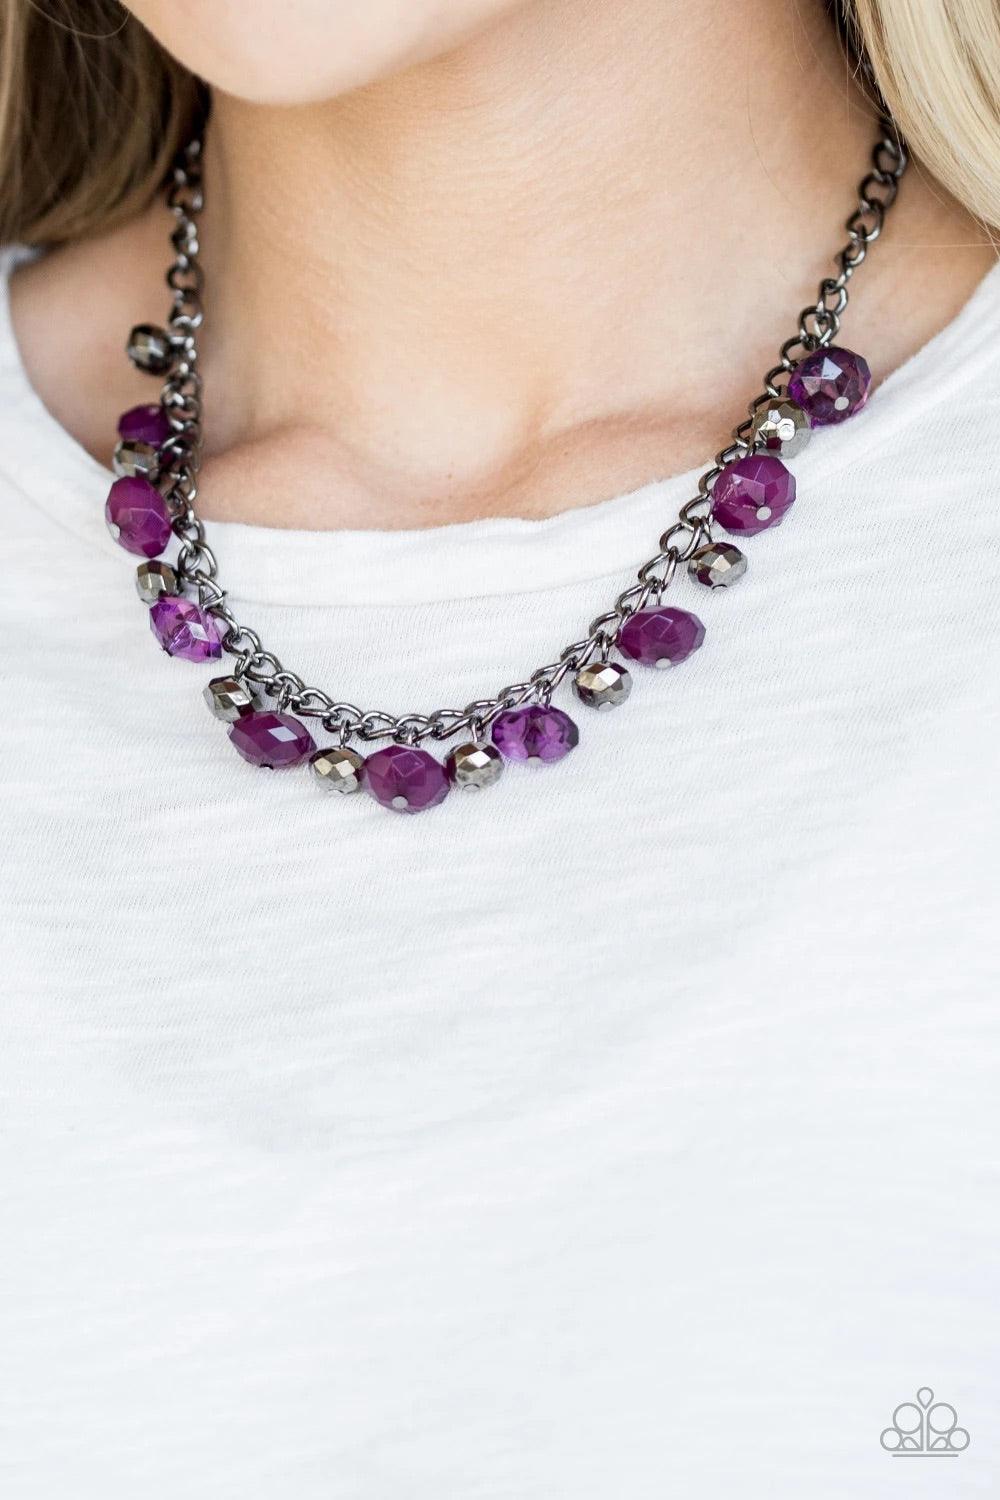 Paparazzi Accessories Runway Rebel - Purple Featuring cloudy and glassy finishes, faceted purple crystal-like beads swing from the bottom of a glistening gunmetal chain. Faceted gunmetal beads join the purple beading, creating a flirtatious fringe below t